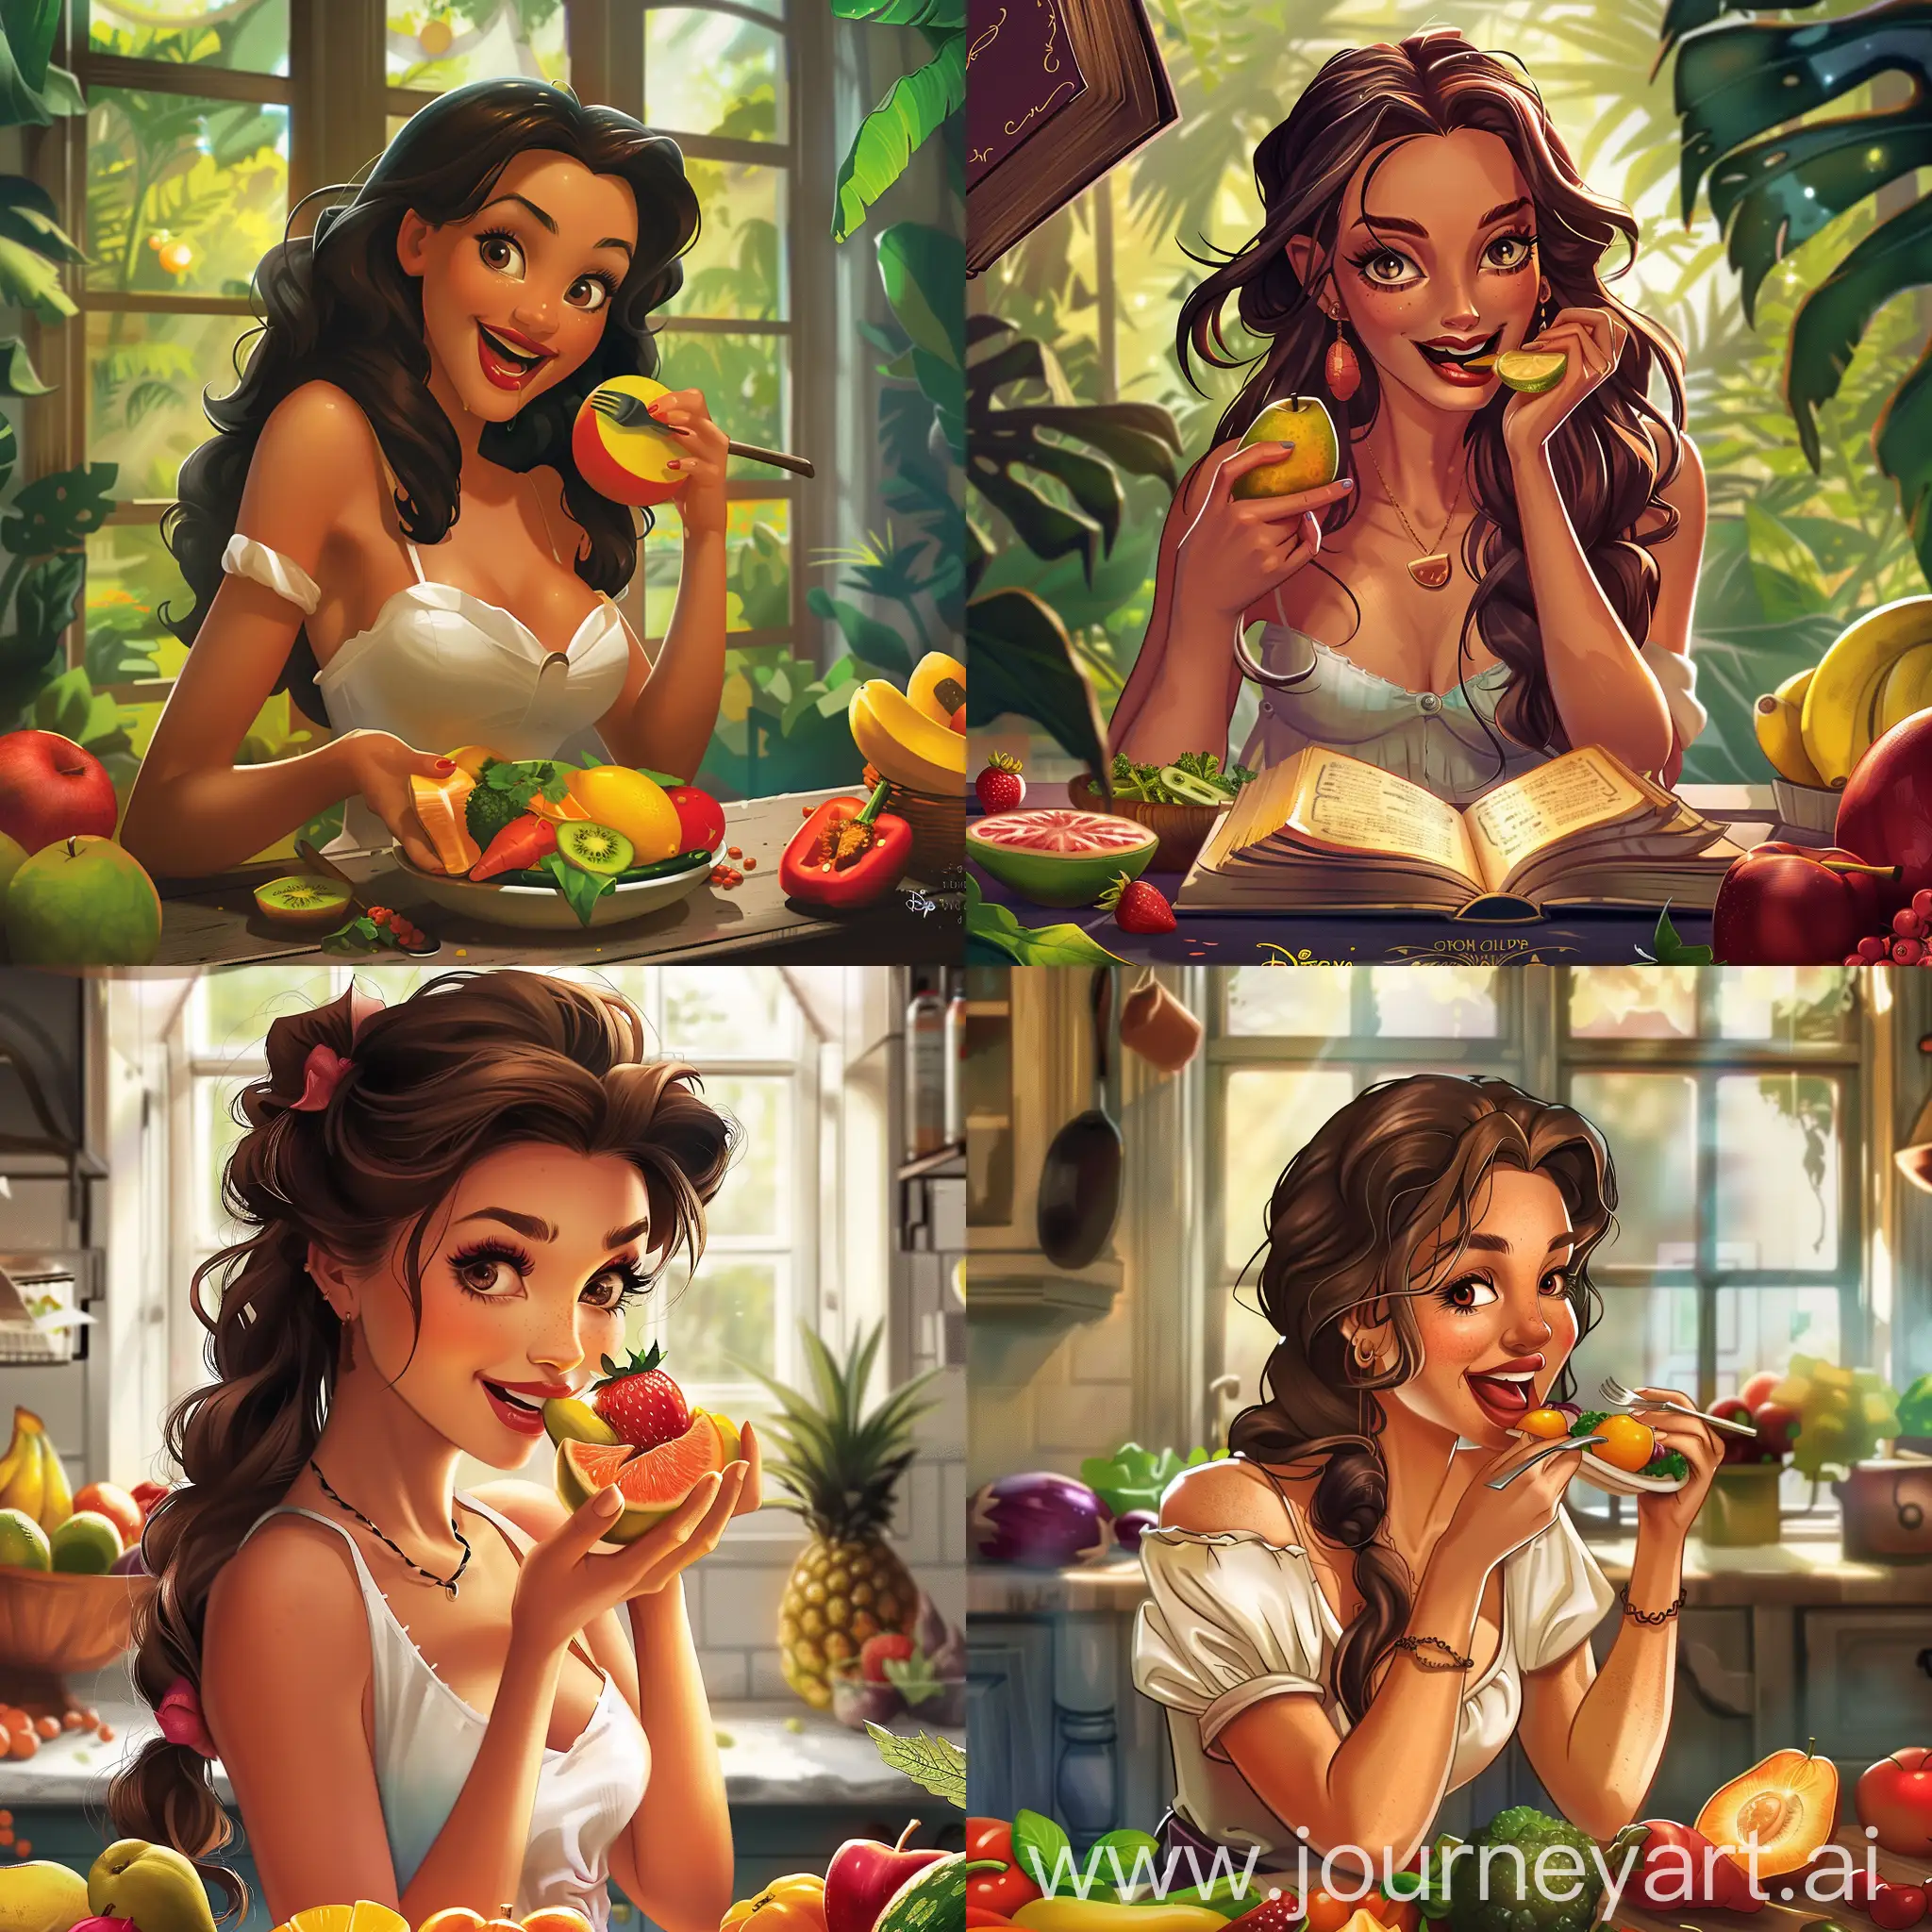 book cover, woman, eating fruits and veggies, cartoonish, Disney style, 